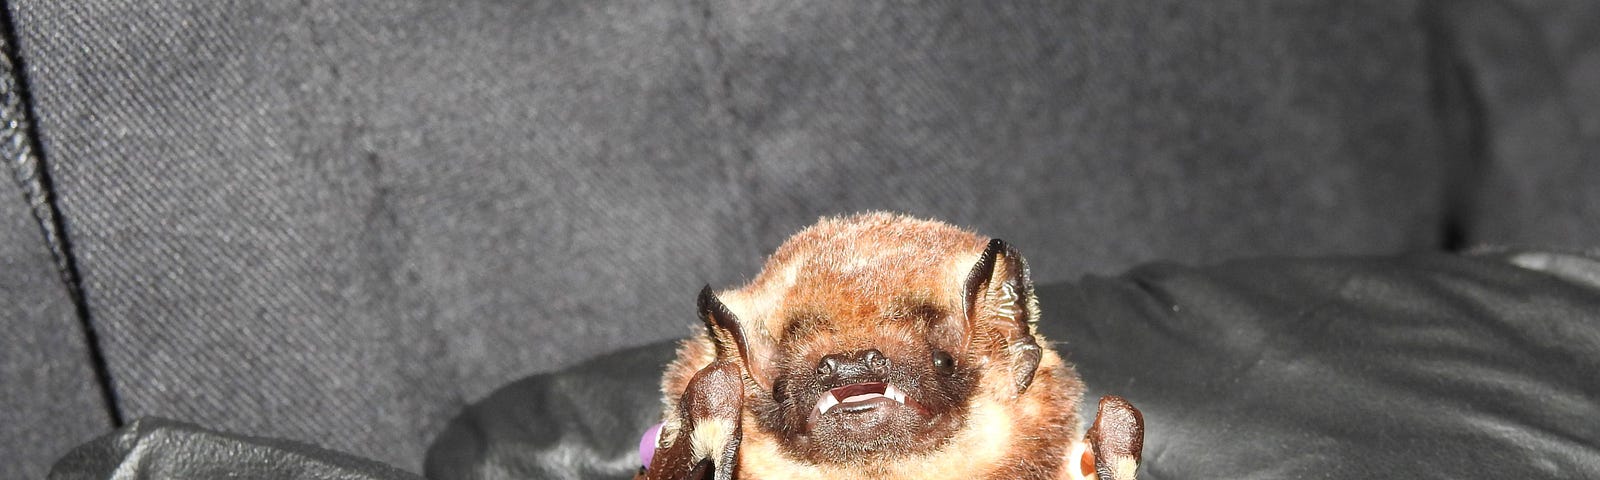 A black glove holds a ʻōpeʻapeʻa (Hawaiian hoary bat). It is brown with a snout.